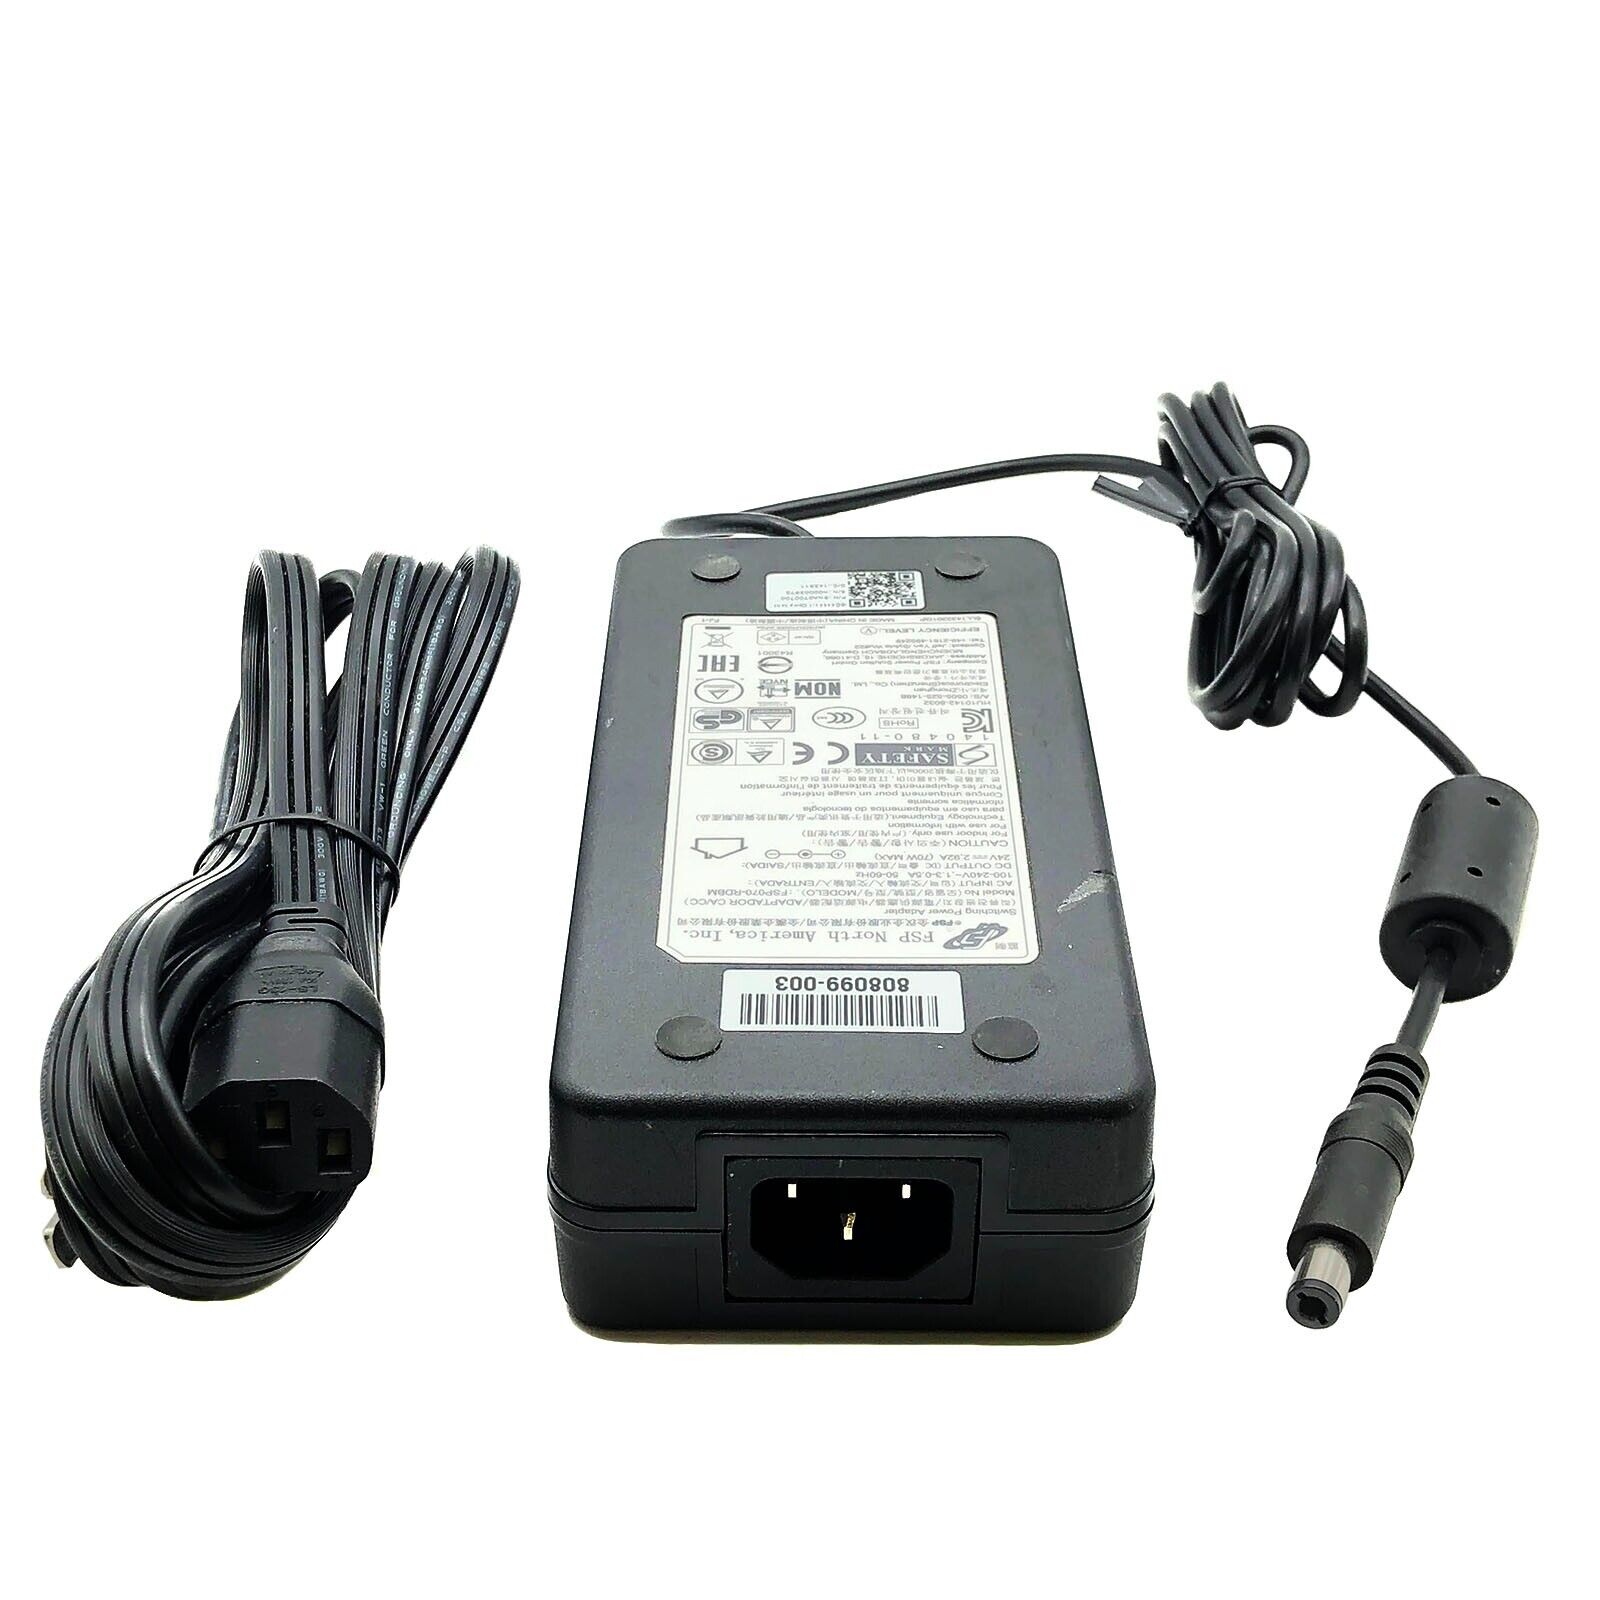 *Brand NEW*Genuine FSP FSP070-RDBM 24V 2.92A 70W AC Switching Adapter Charger POWER Supply